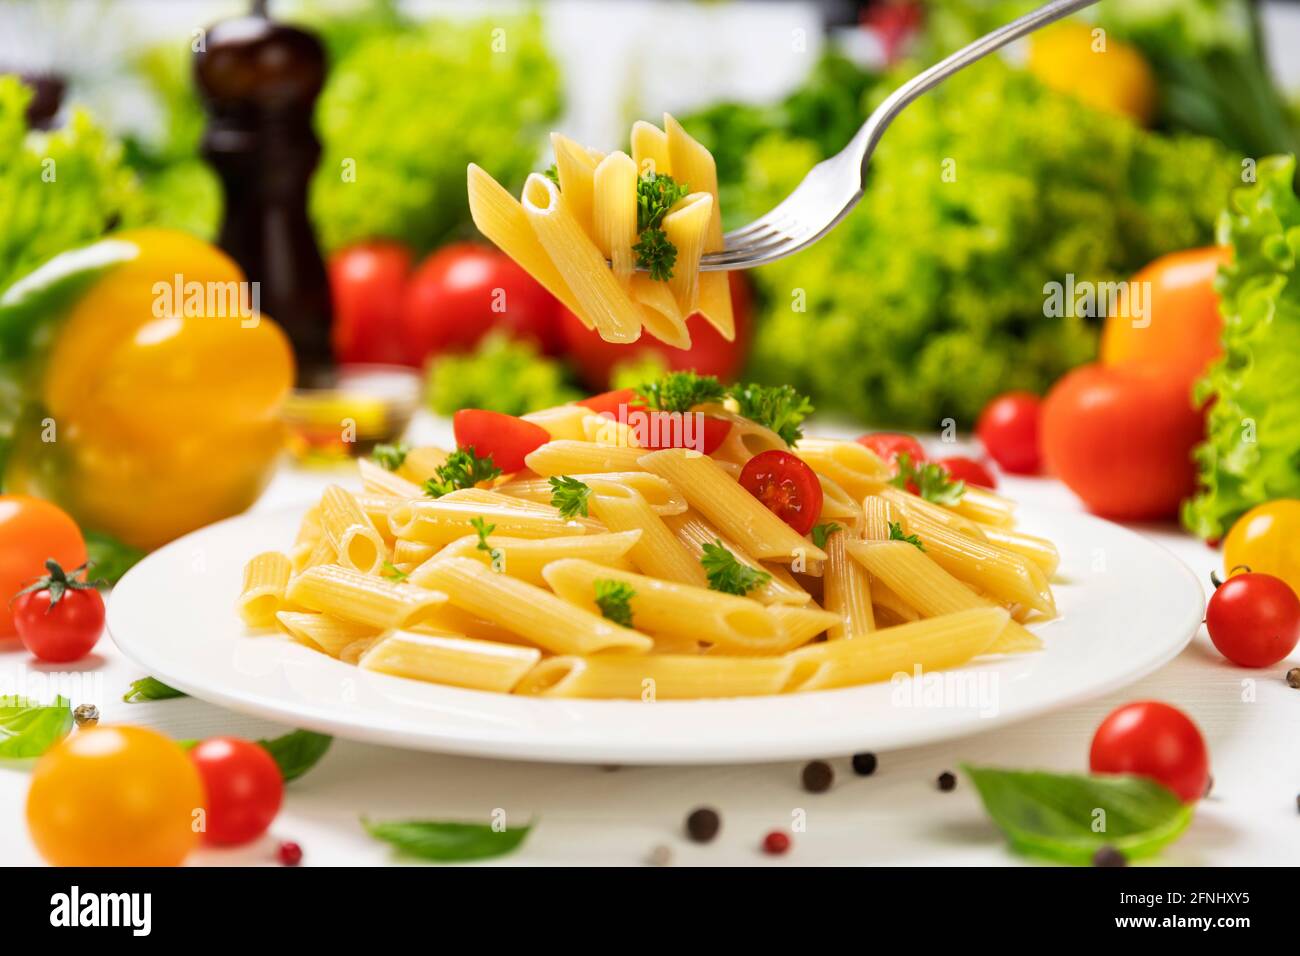 Plate of italian pasta, penne rigate on fork with tomatoes and basil Stock Photo